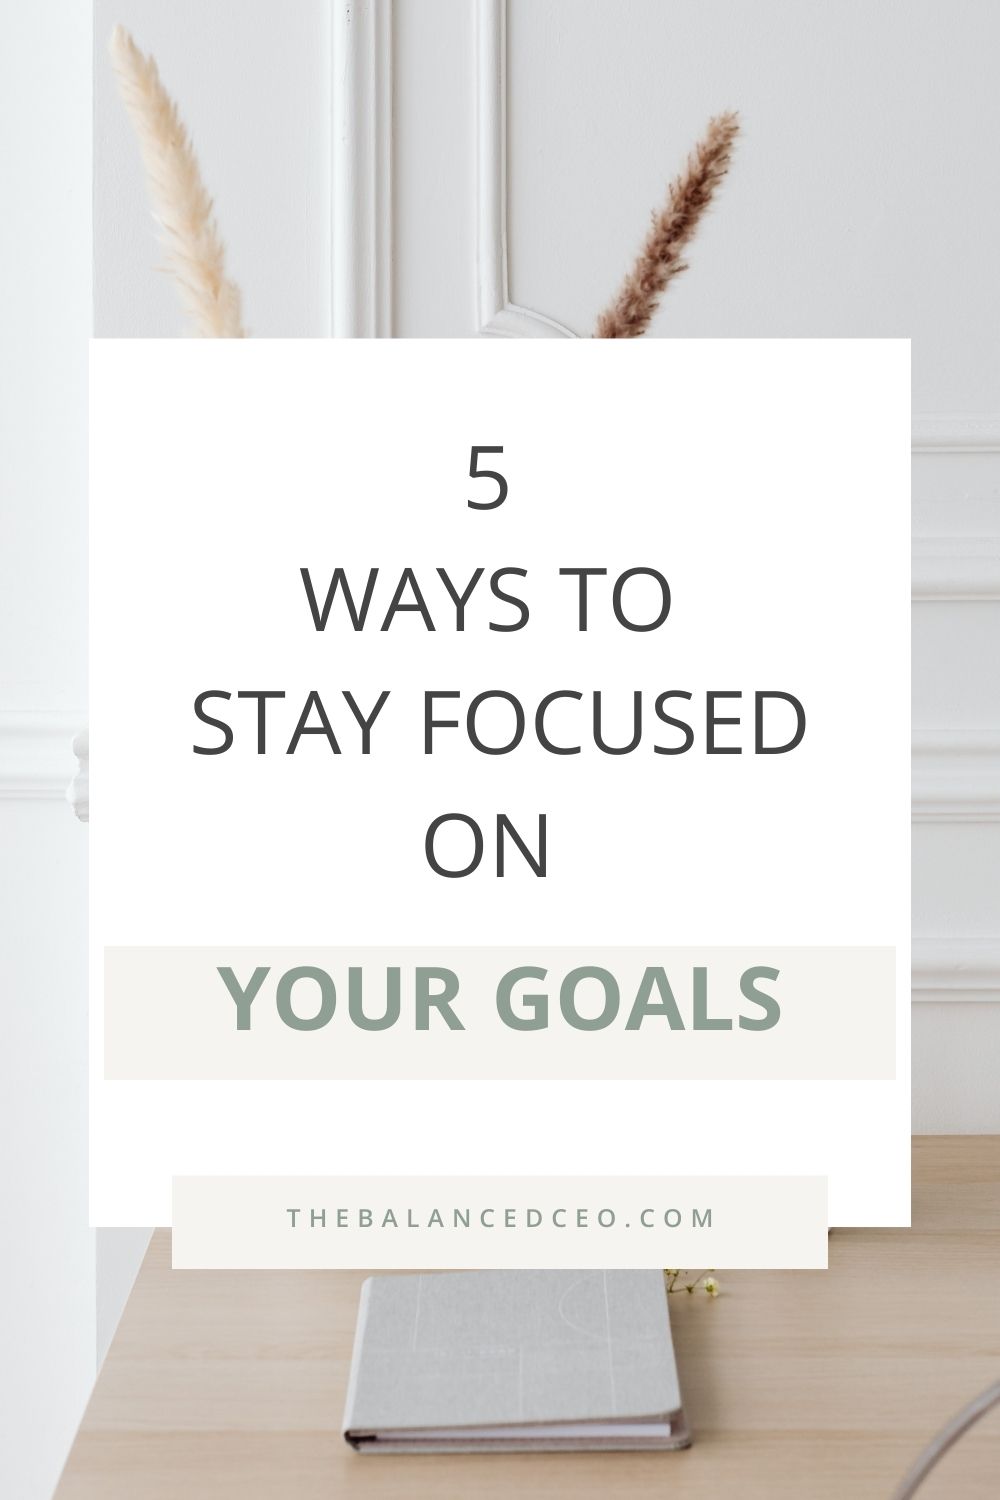 5 Ways to Stay Focused on Your Goals